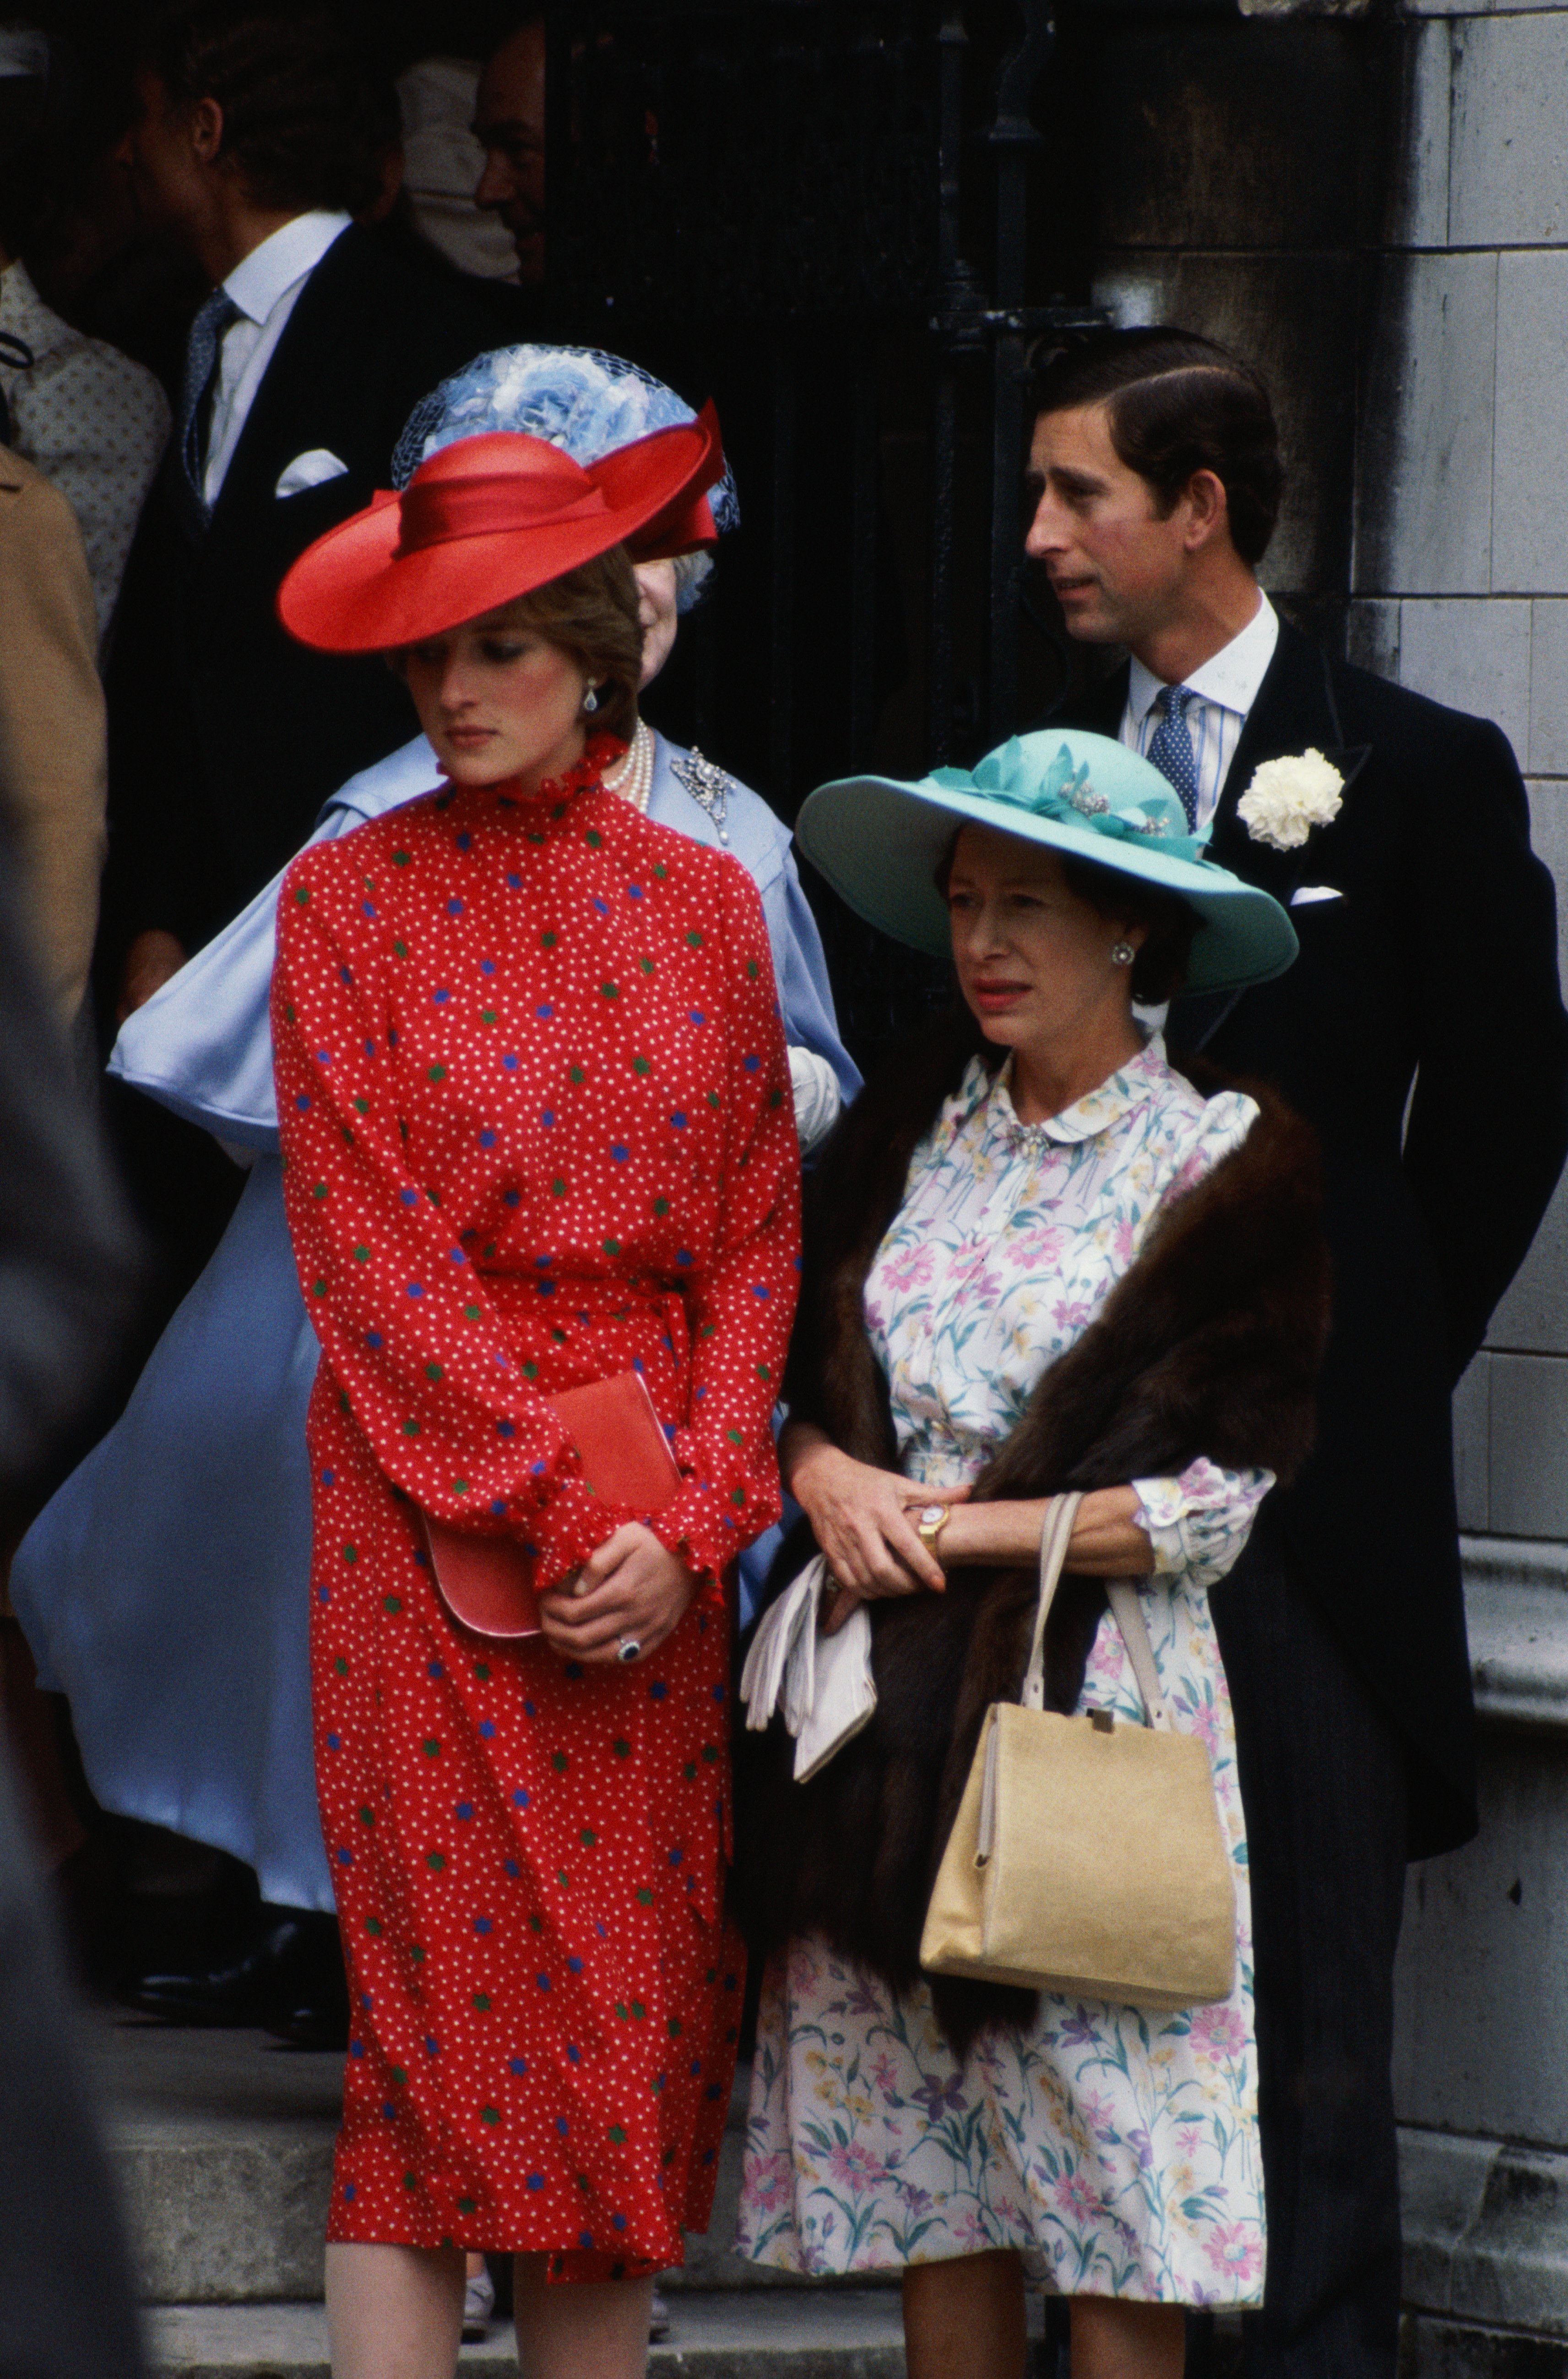 Lady Diana Spencer with her fiance Prince Charles and Princess Margaret at the wedding of Nicholas Soames and Catherine Weatherall at St. Margaret's Church, Westminster, London, June 4, 1981 | Photo: Getty Images